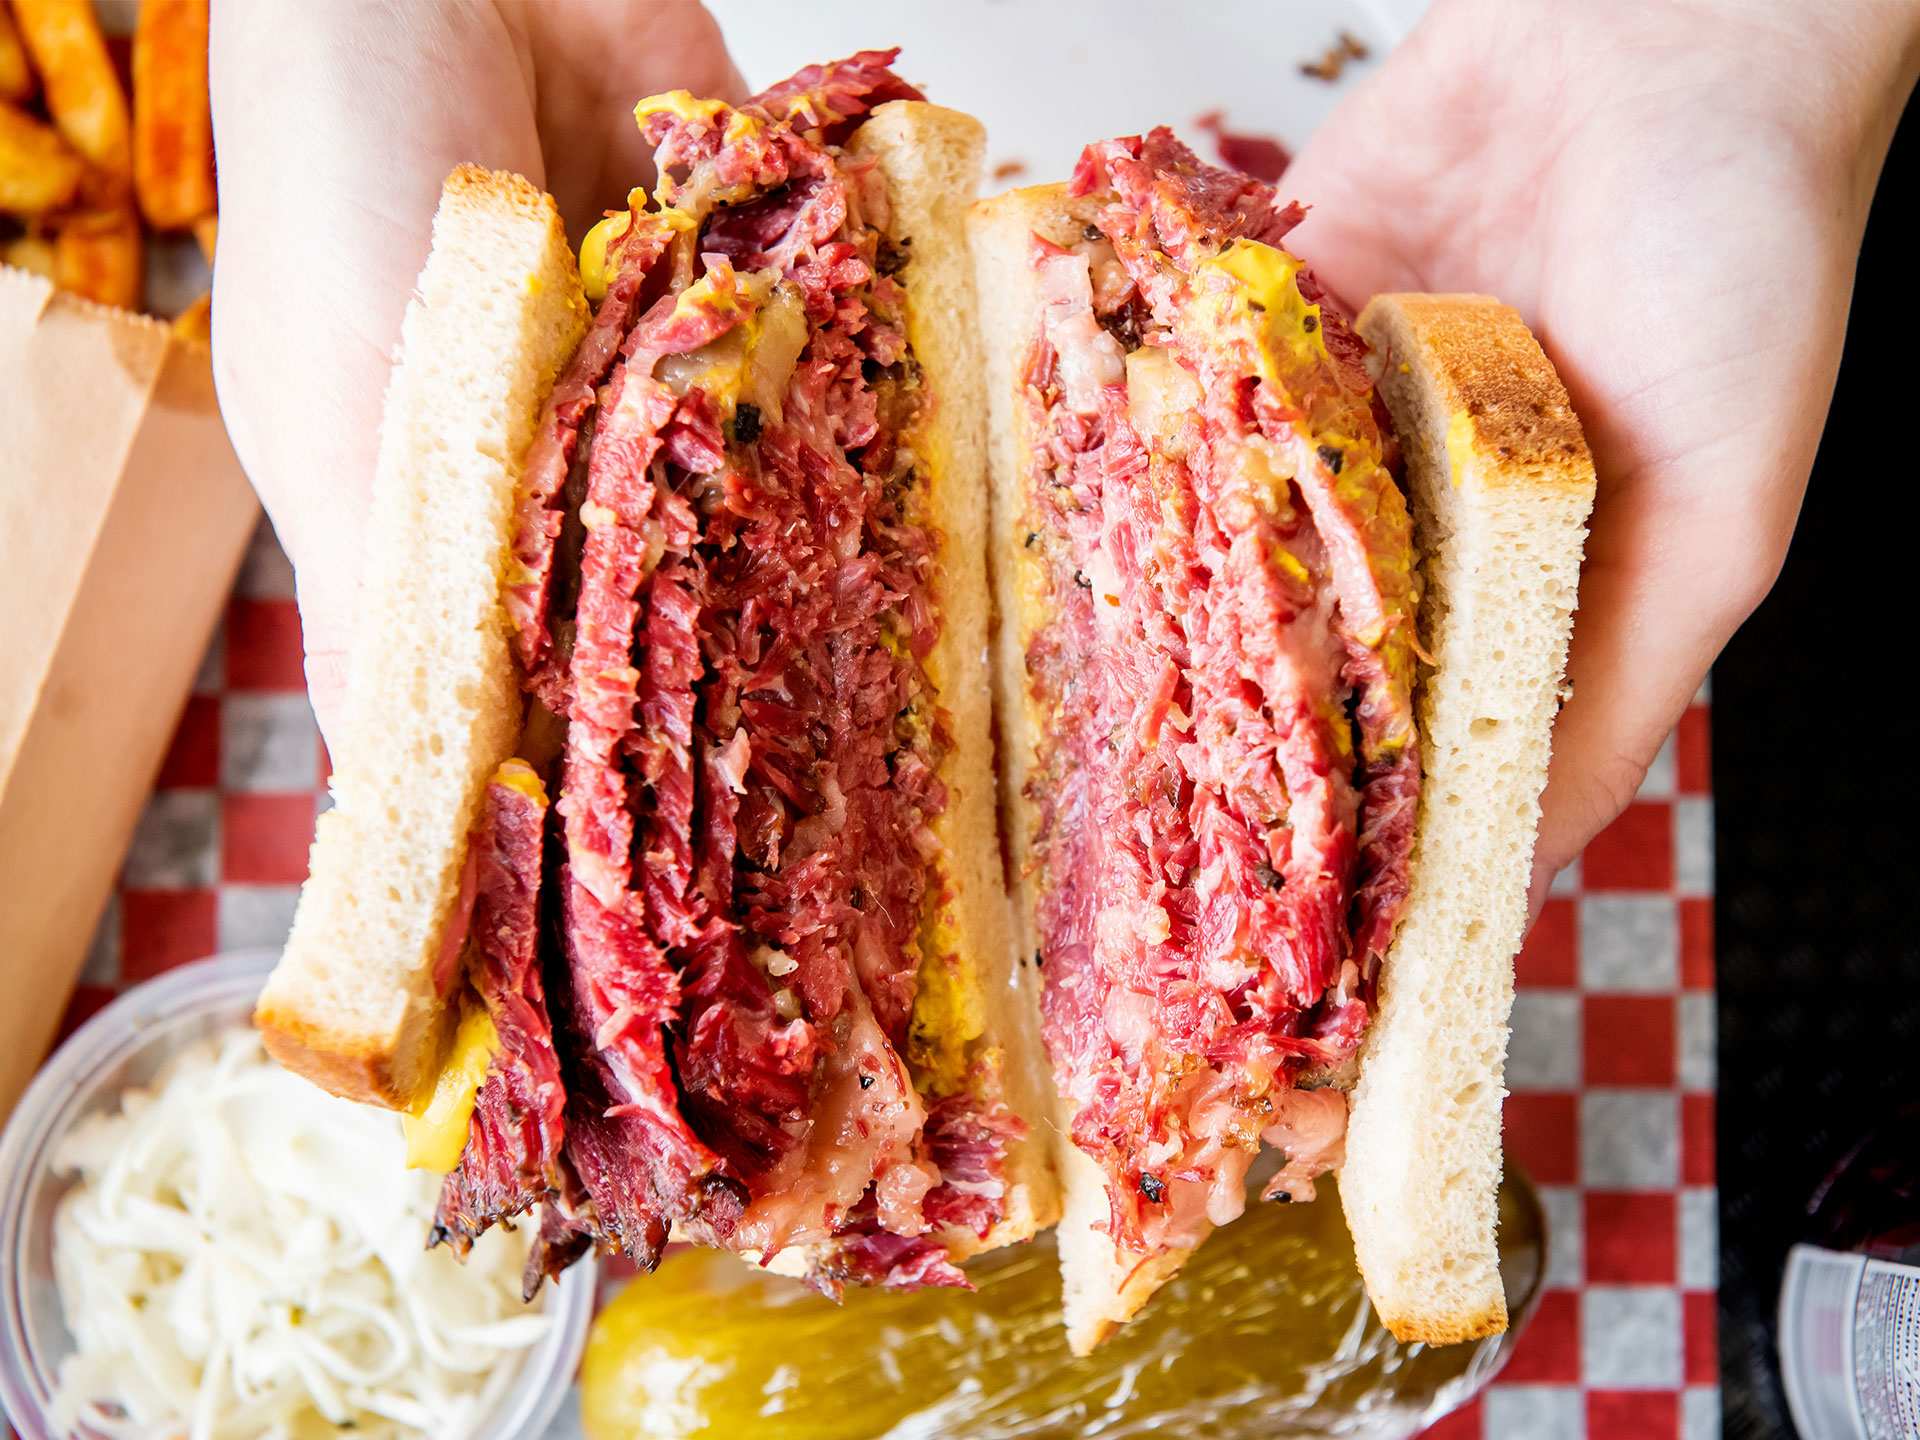 Scarborough restaurants | A perfect sandwich at SumiLicious Smoked Meat & Deli